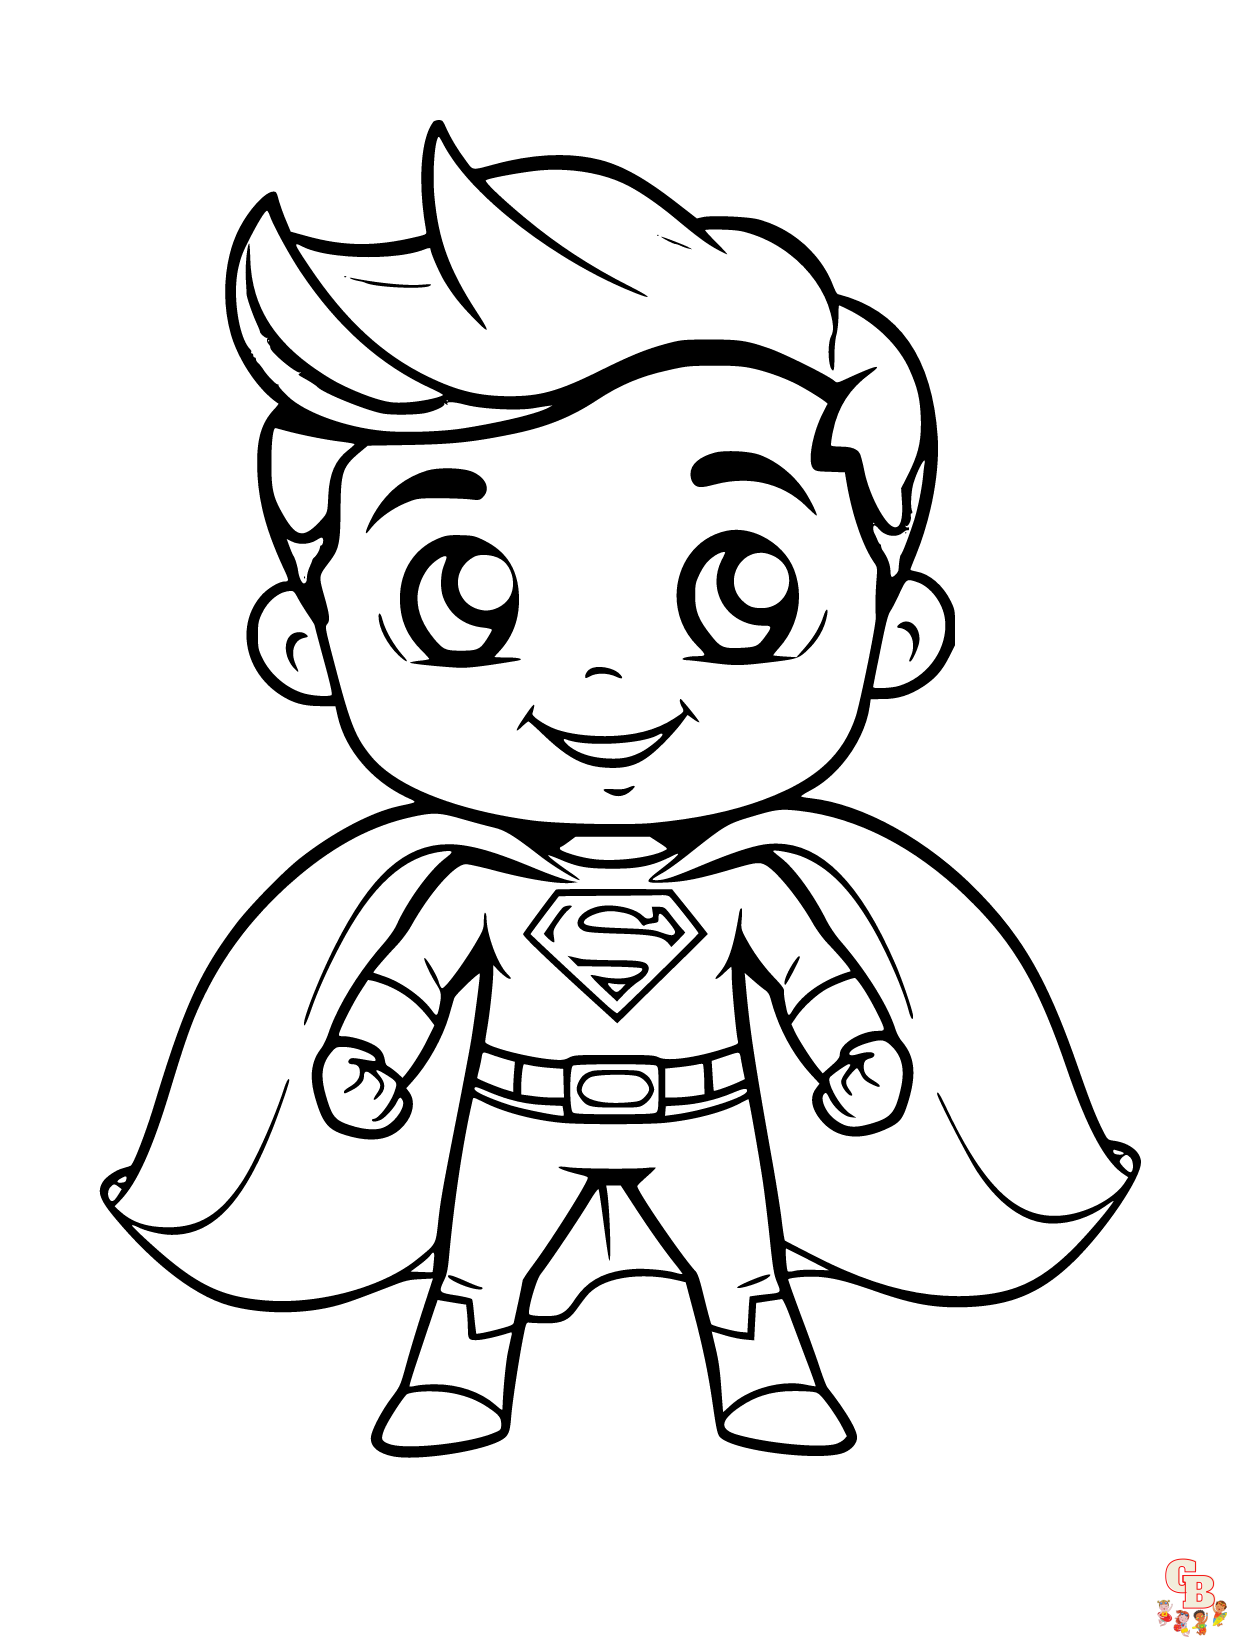 Superhero coloring pages unleash your childs creativity